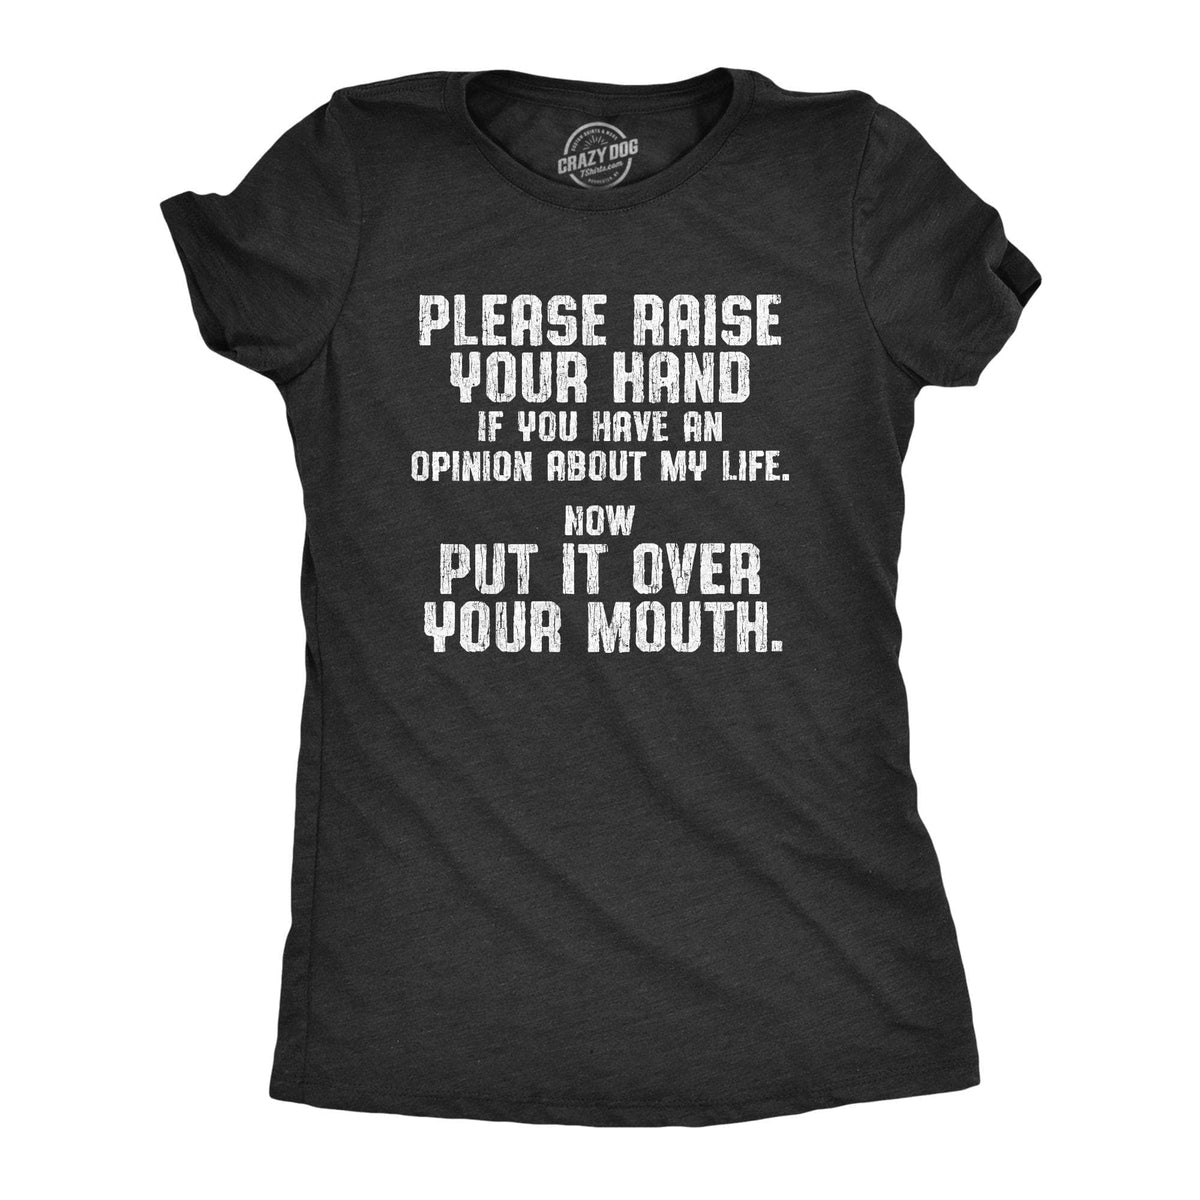 Raise Your Hand If You Have An Opinion About My Life Women&#39;s Tshirt - Crazy Dog T-Shirts